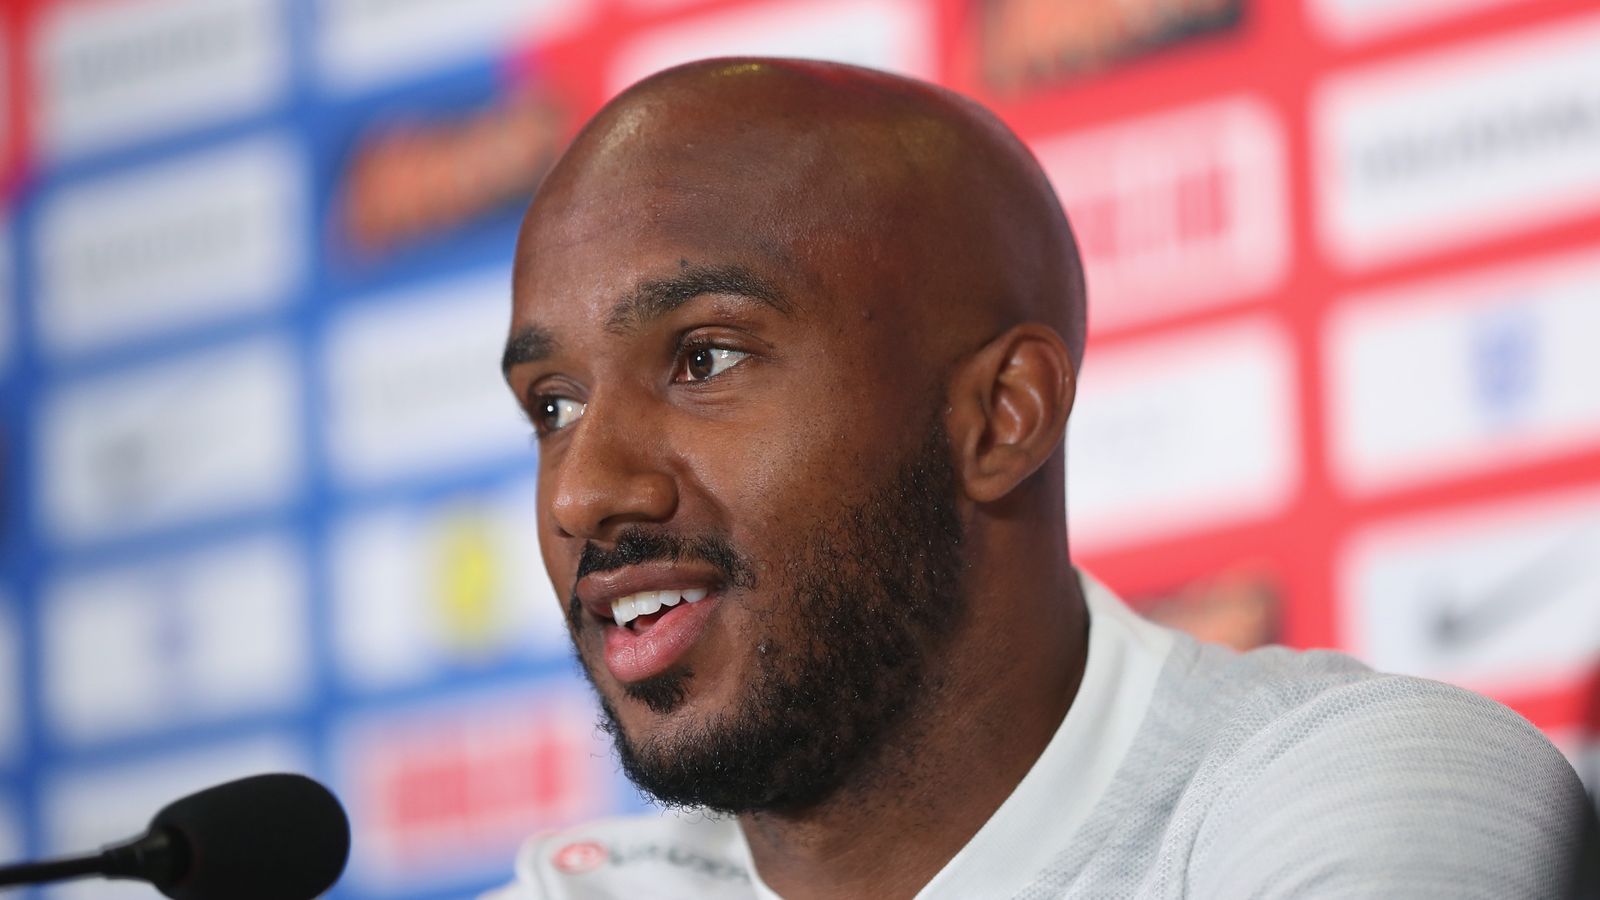 England training at World Cup is 'fiery', says Fabian Delph | Football ...